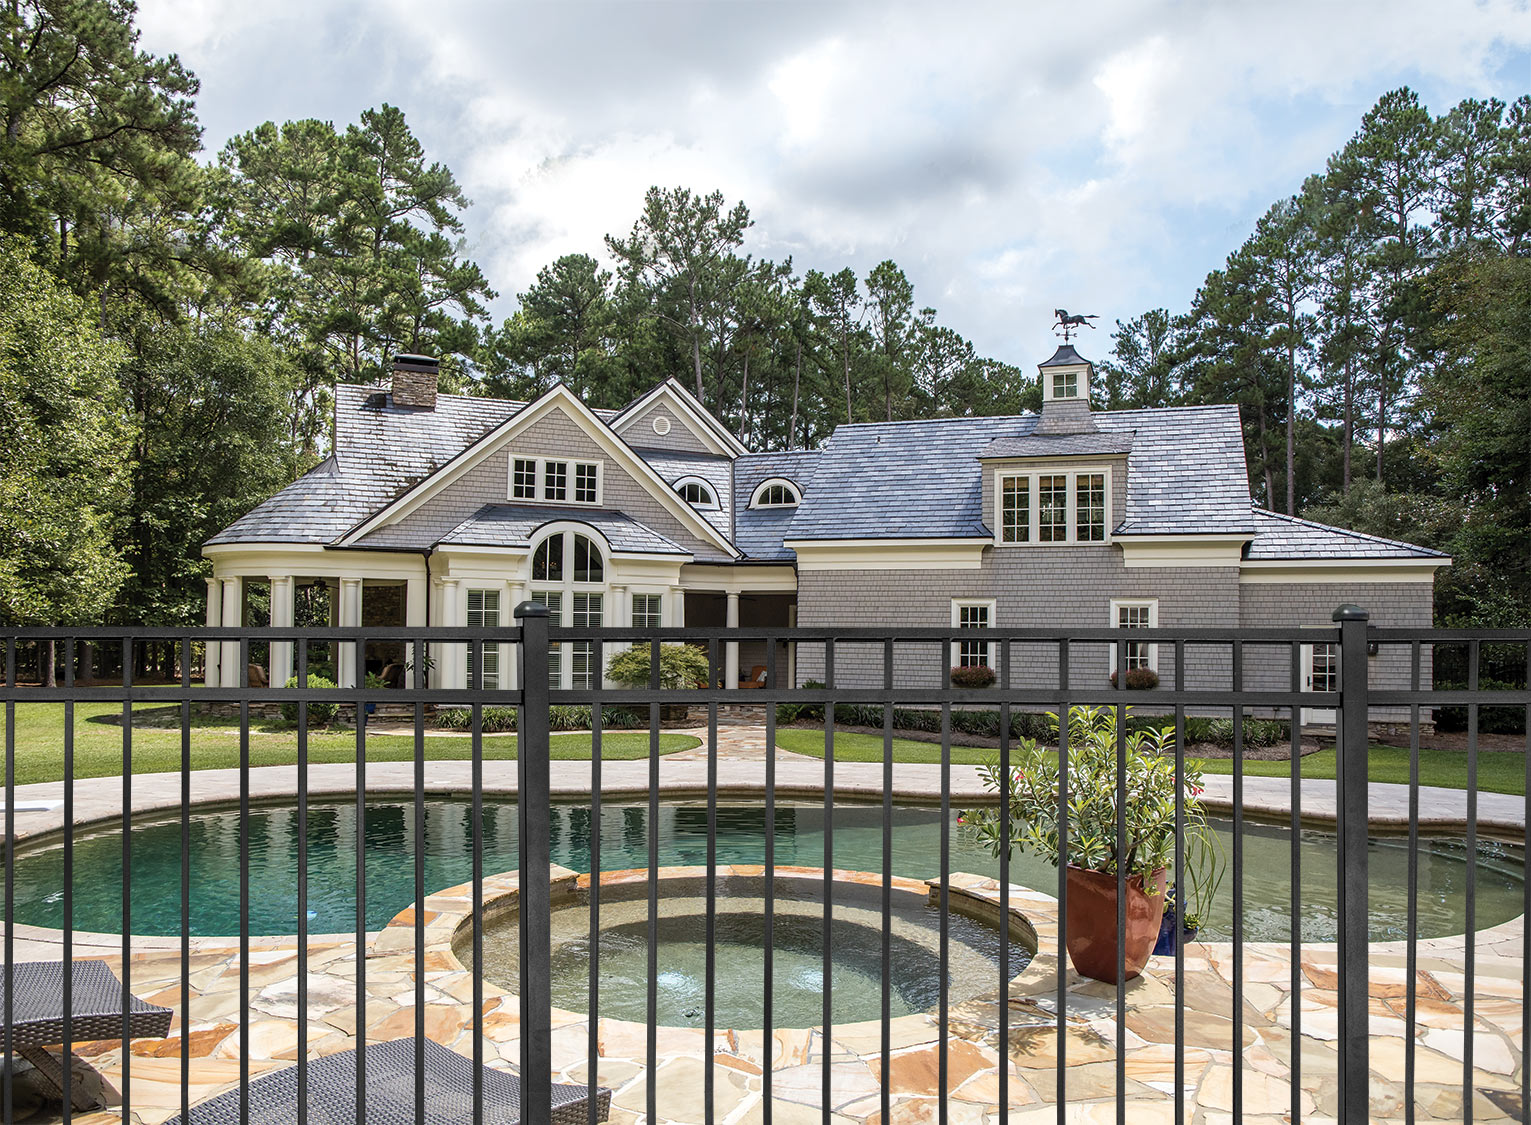 Aluminum fencing in the backyard of a property enclosing a pool and beautiful two-story house. 